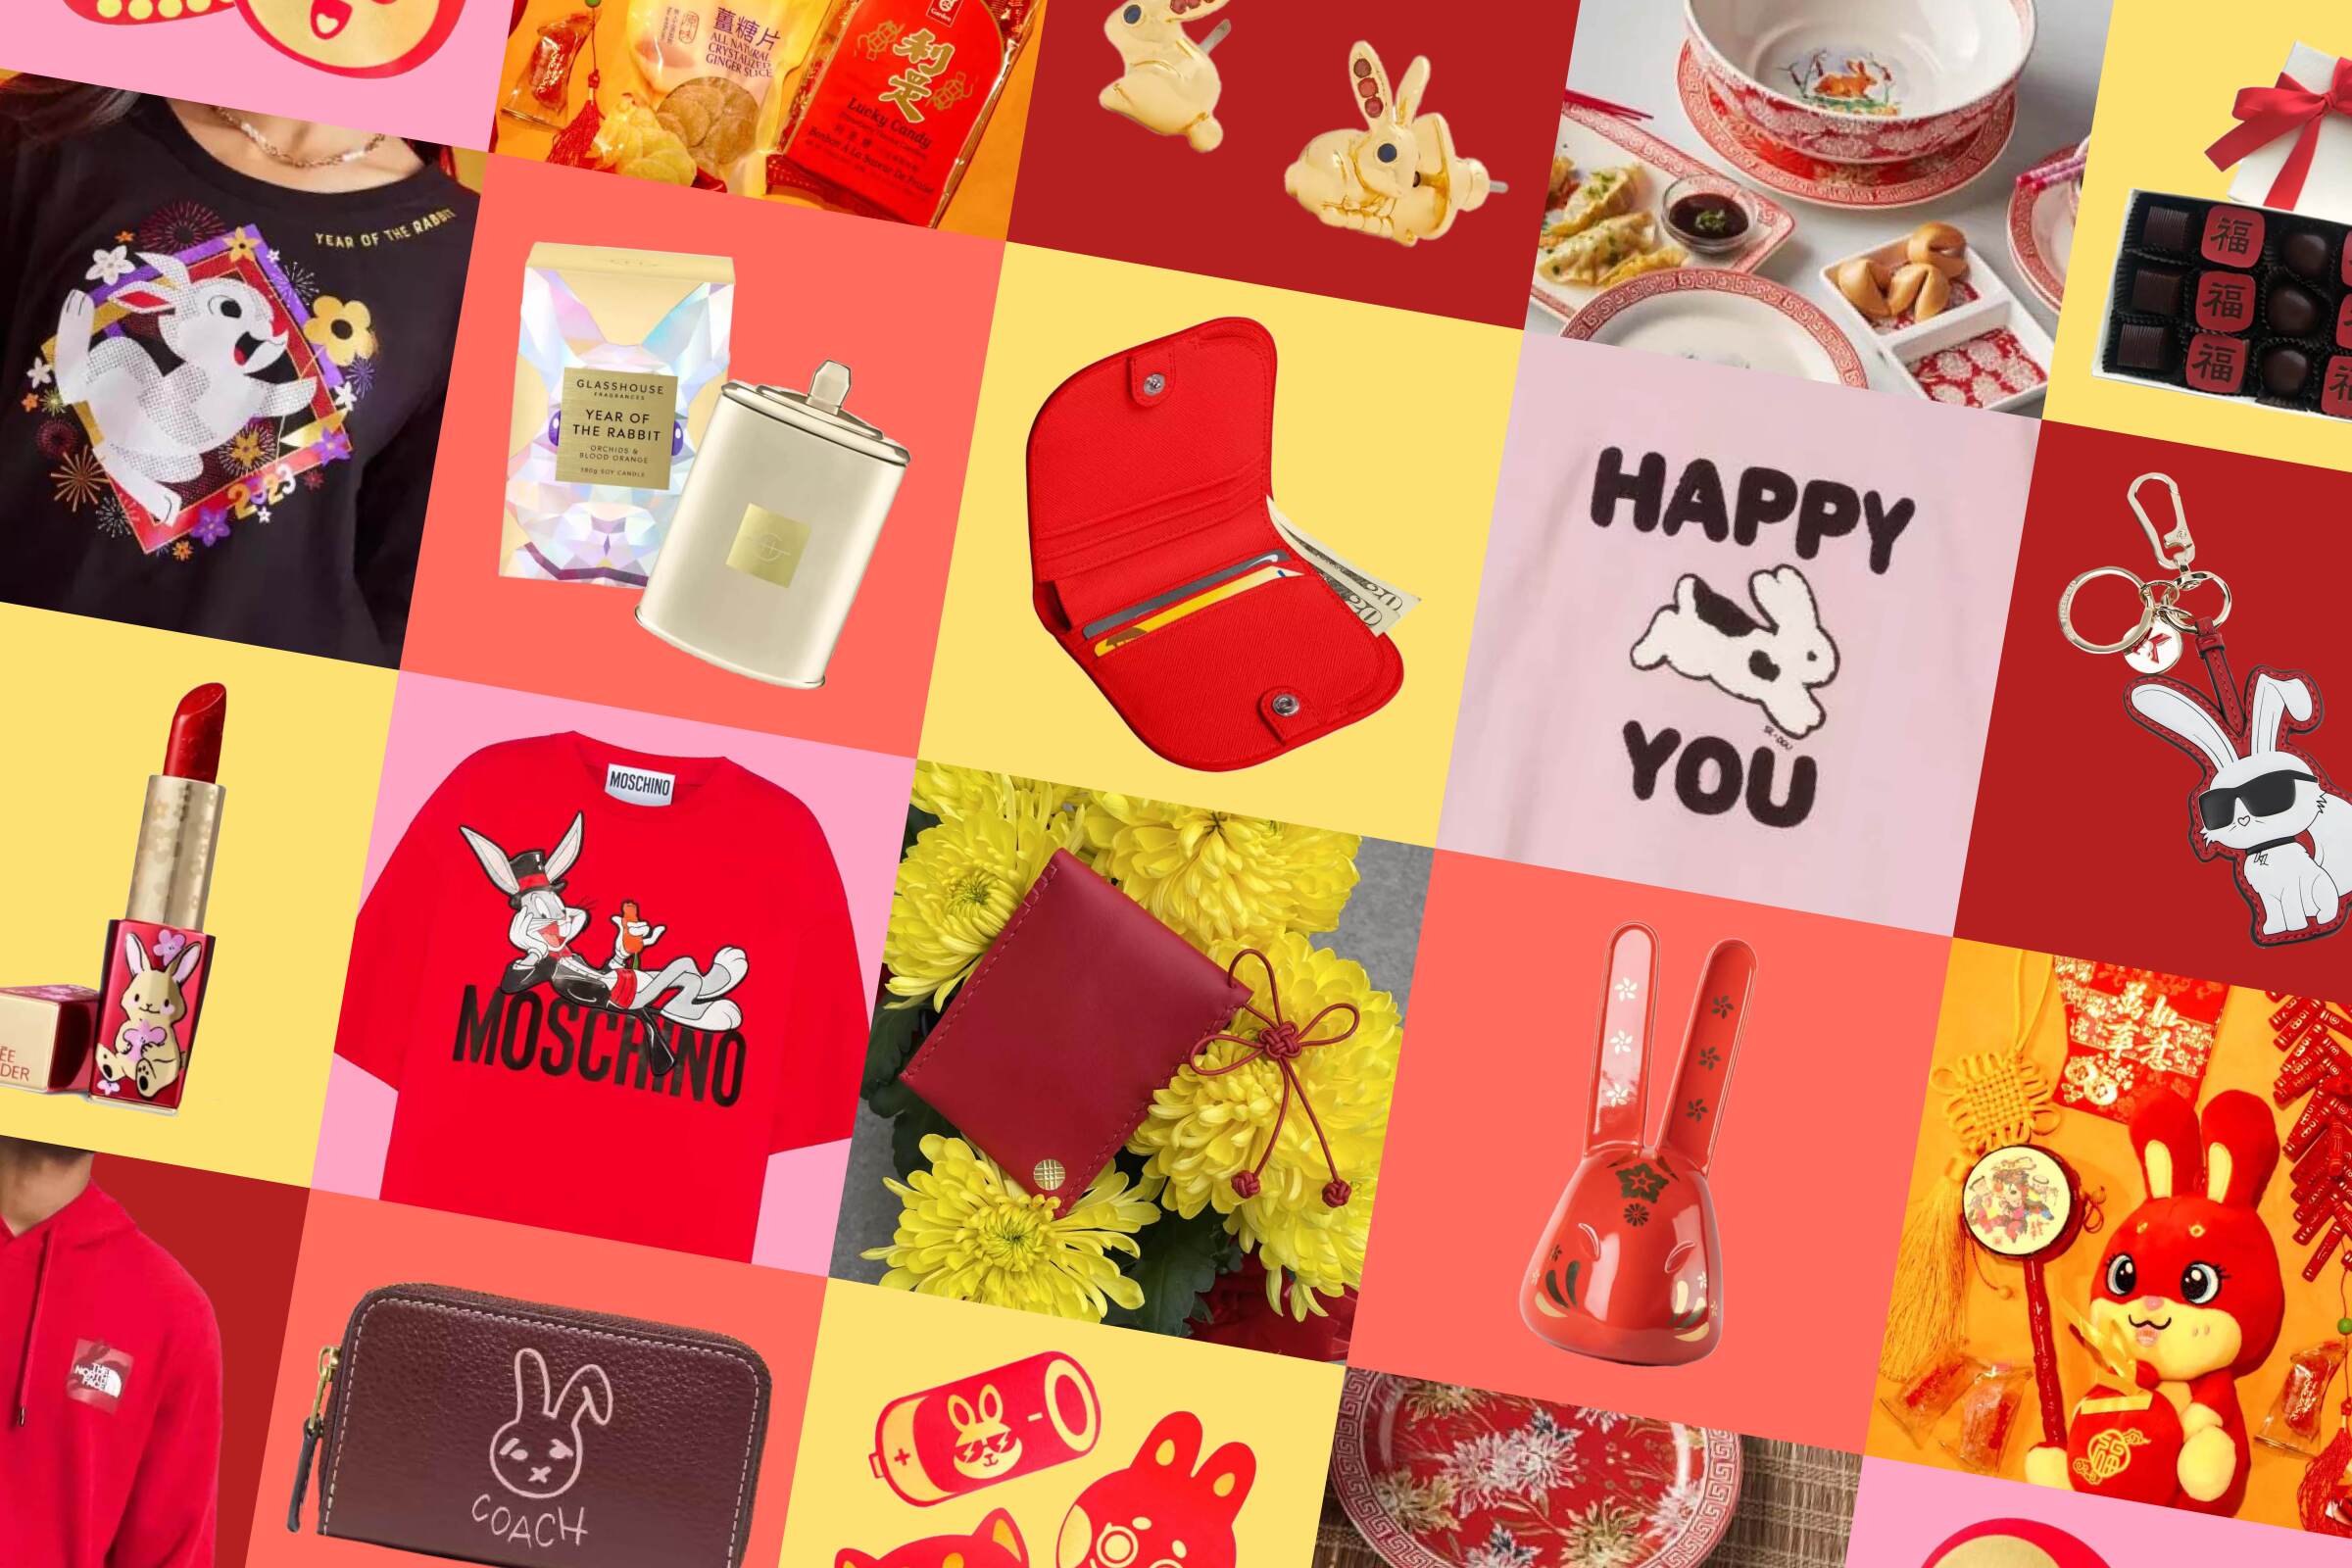 Celebrate Lunar New Year with year of the rabbit gift ideas - Los Angeles  Times